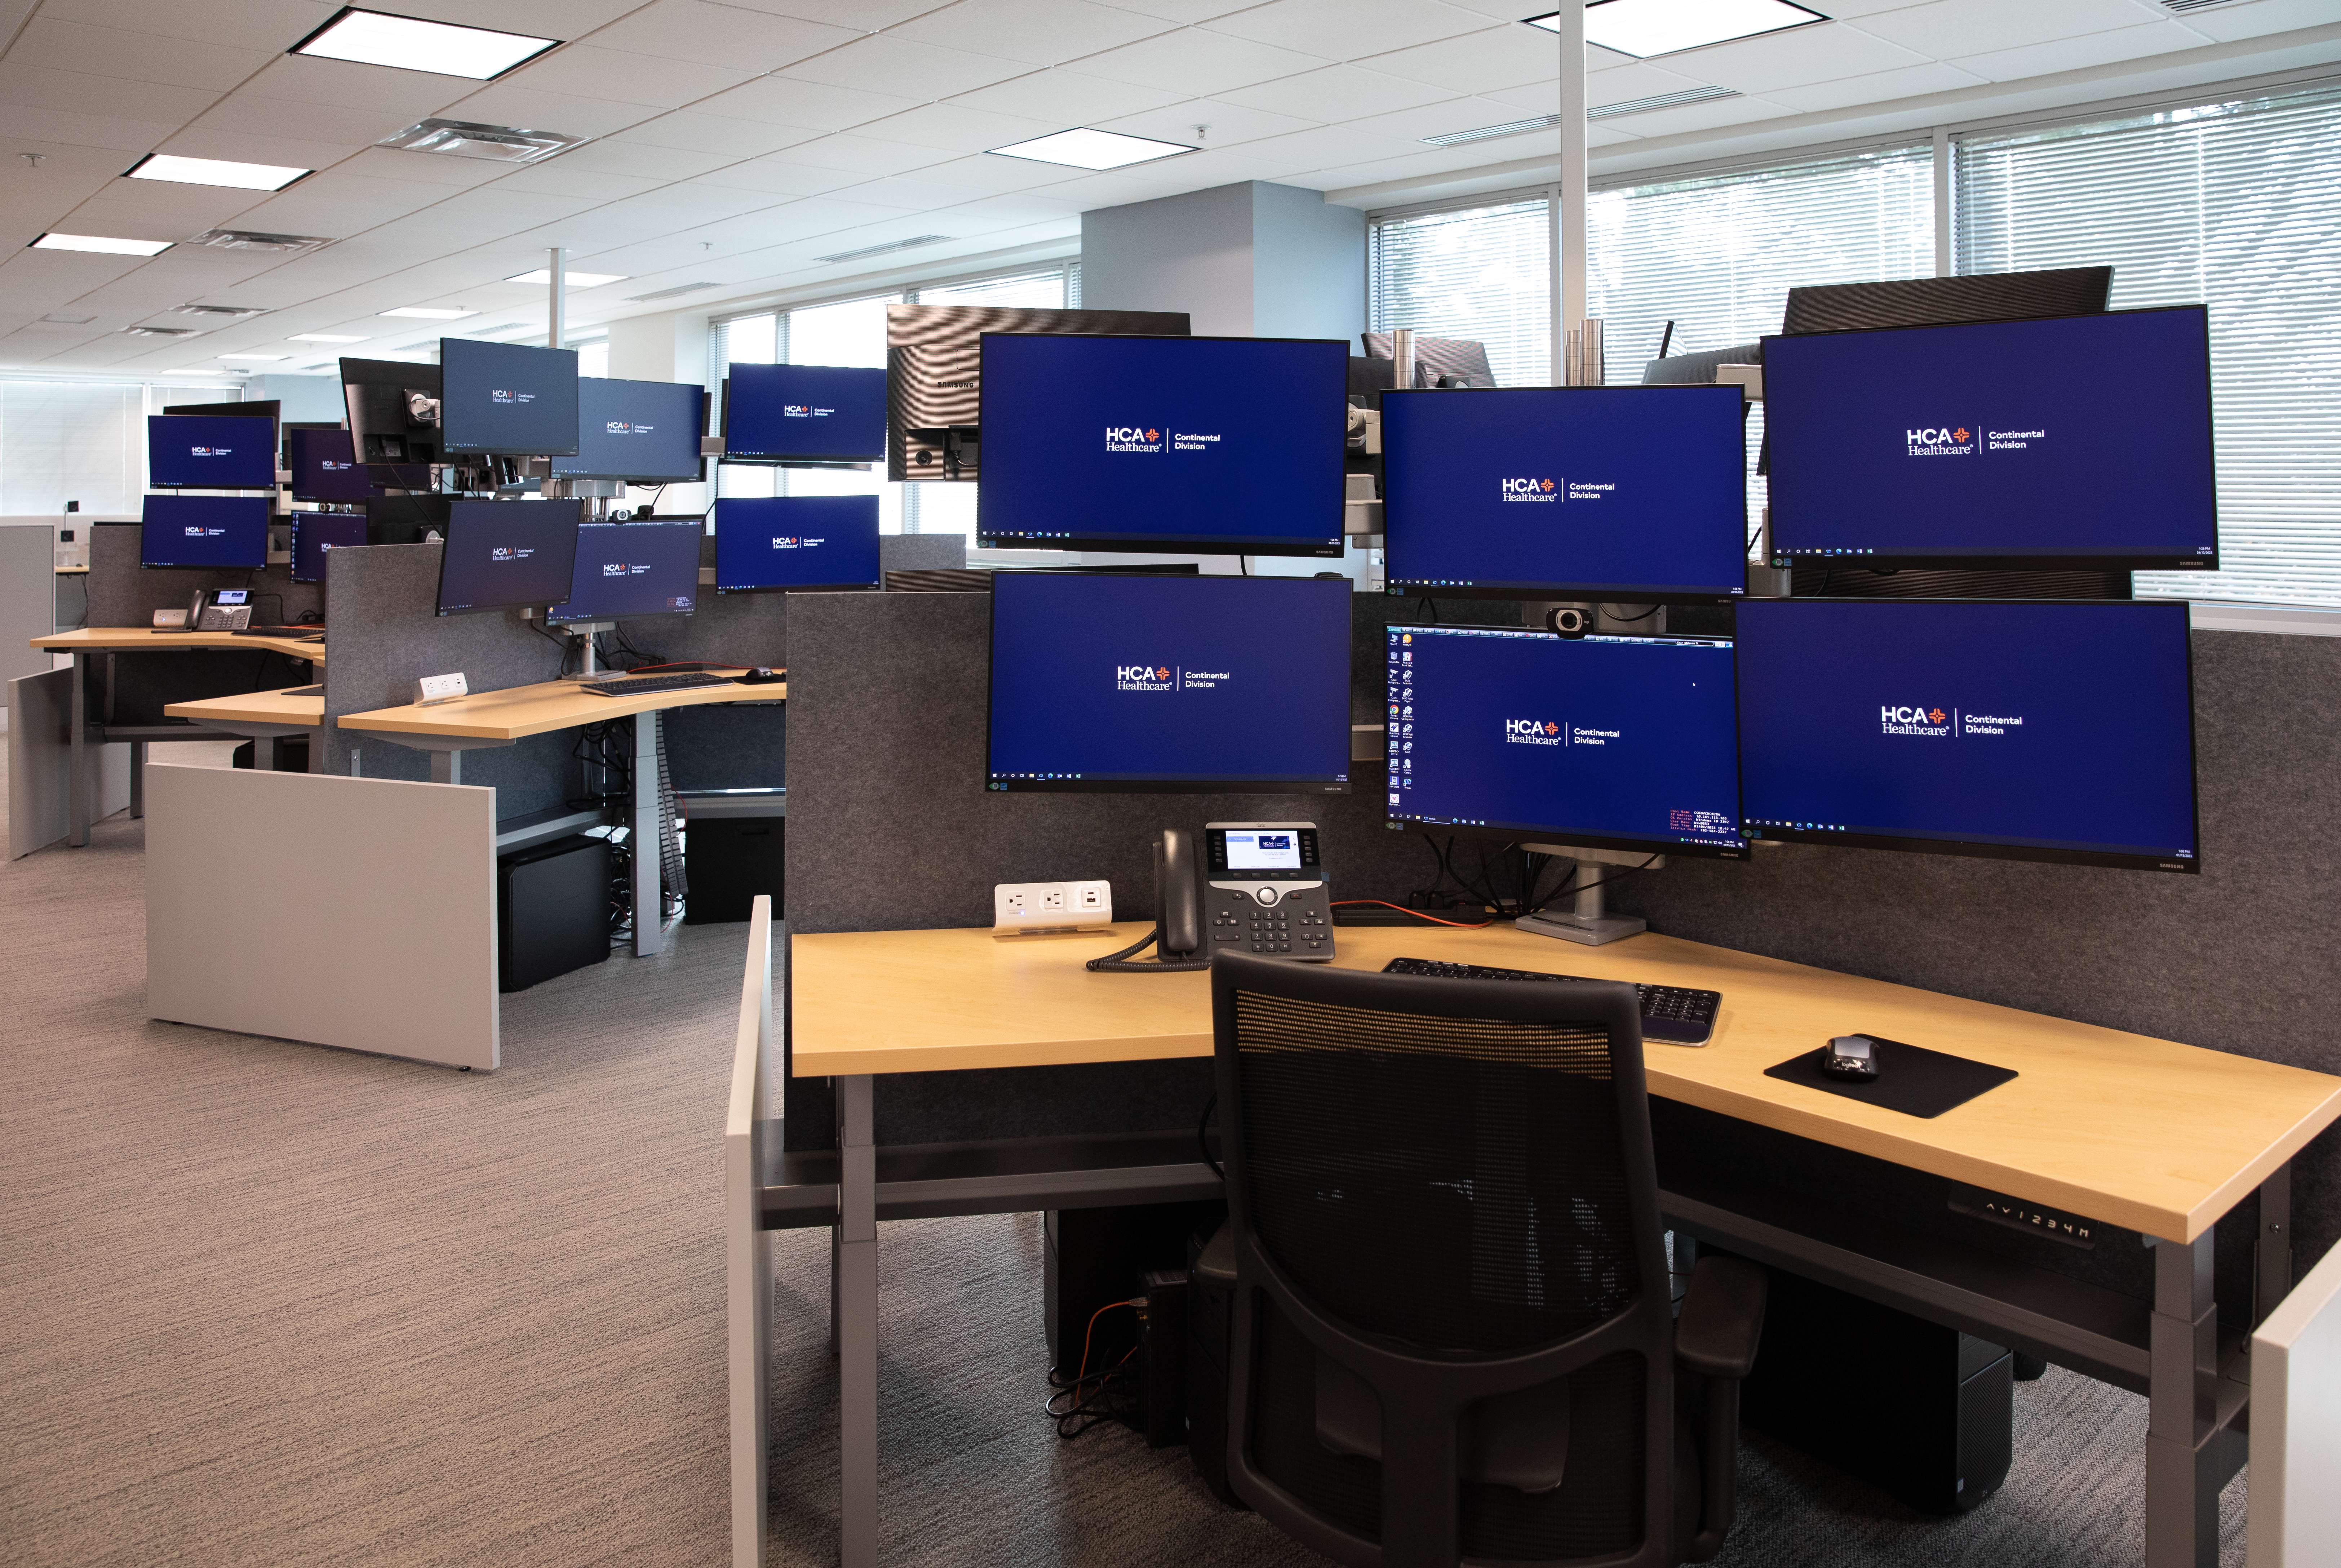 An office setting displaying computer desks with 6 monitors at each desk.